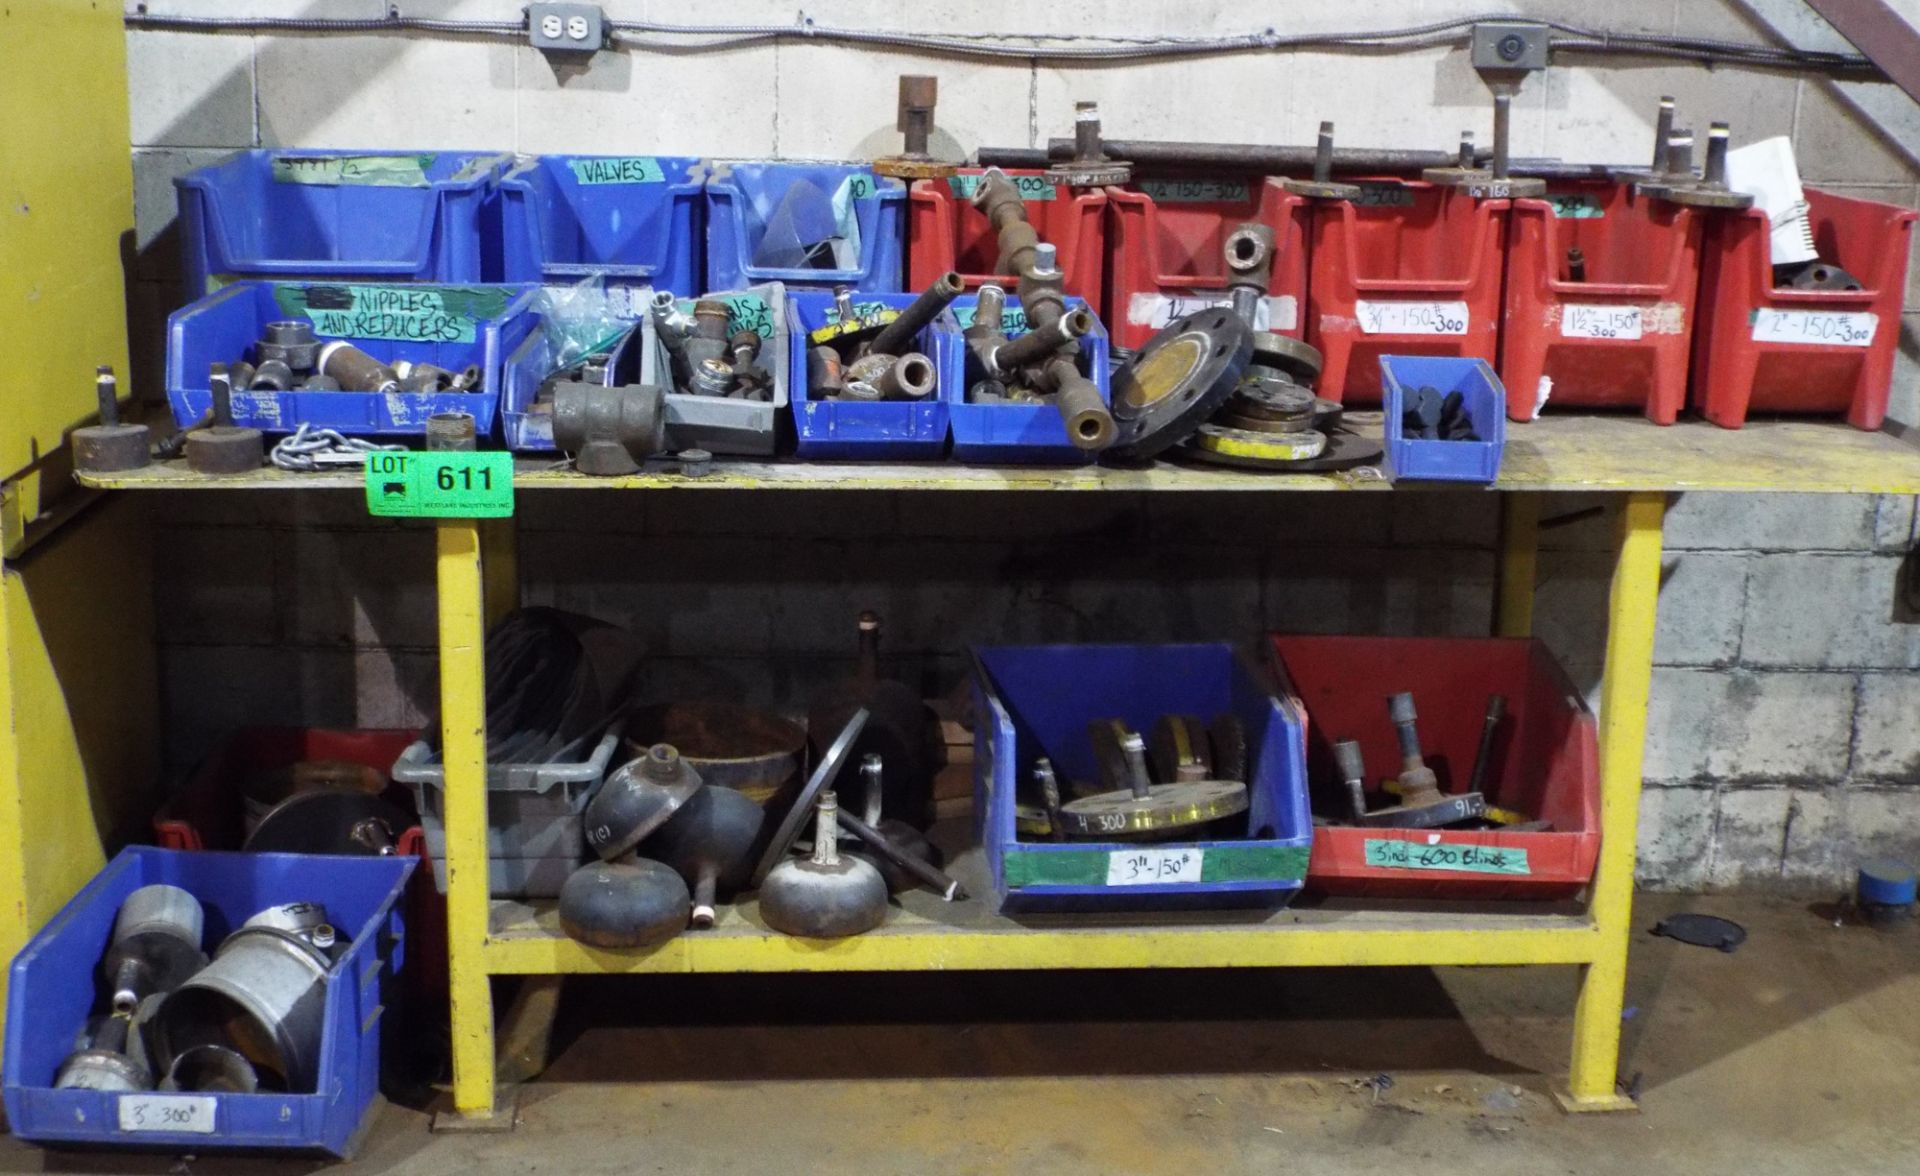 LOT/ STEEL SHOP TABLE WITH CONTENTS - PIPE FITTINGS, HARDWARE AND TEST FIXTURES